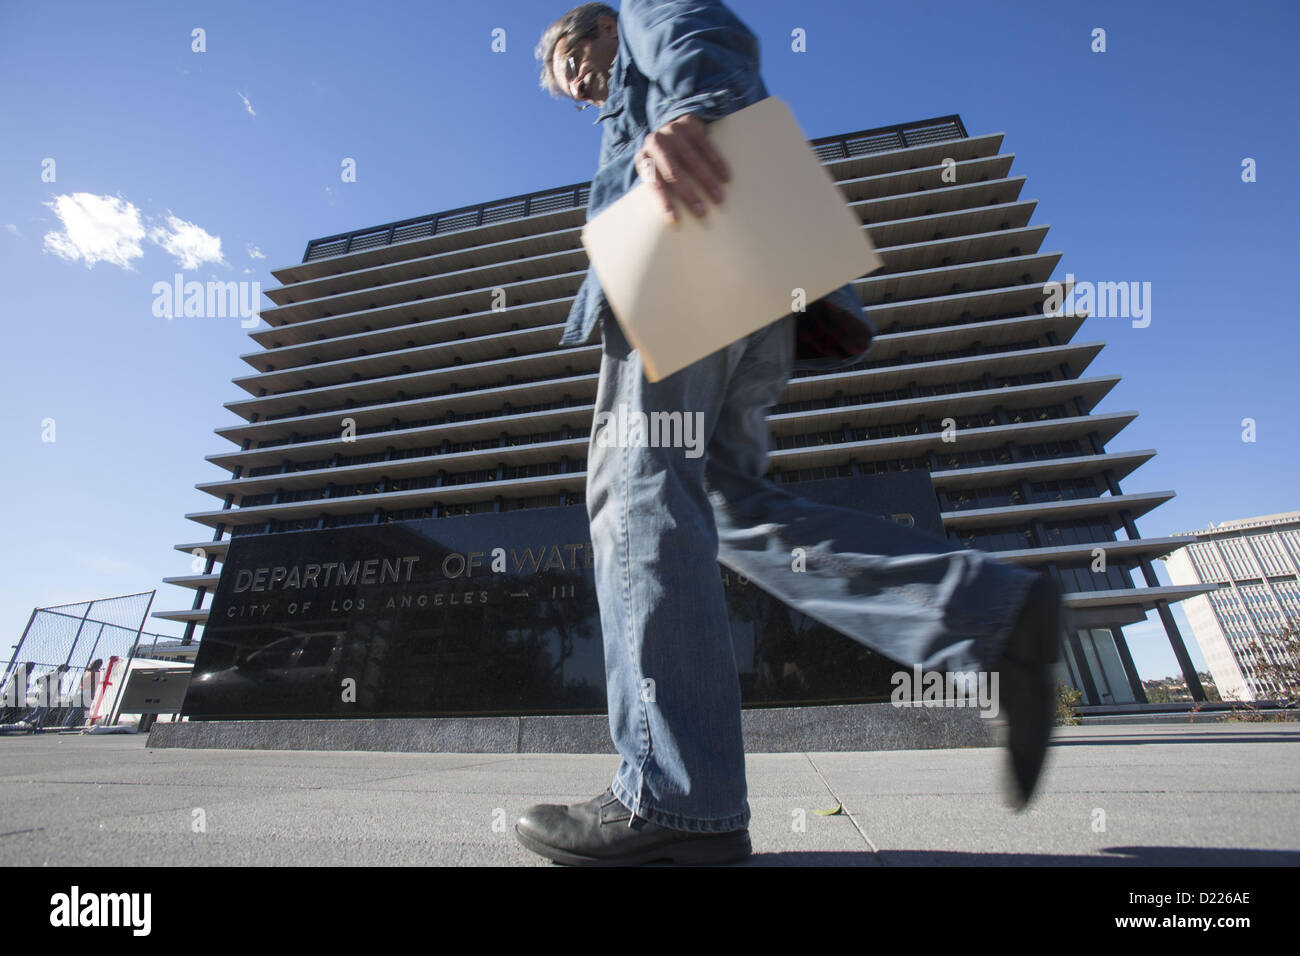 Jan. 11, 2013 - Los Angeles, California (CA, United States - A man walks past the headquater of the Department of Water and Power in downtown Los Angeles, Friday, January 11, 2013. The Board of Water and Power Commissioners today unanimously approved a $530 million program to pay approved commercial, industrial and residential property owners for electricity generated from their solar panels. The approval to sign 20-year contracts with customers who install minimum 30 kilowatt-hour solar power systems will make Los Angeles the largest city in the nation to have a so-called Feed-in-Tariff progr Stock Photo